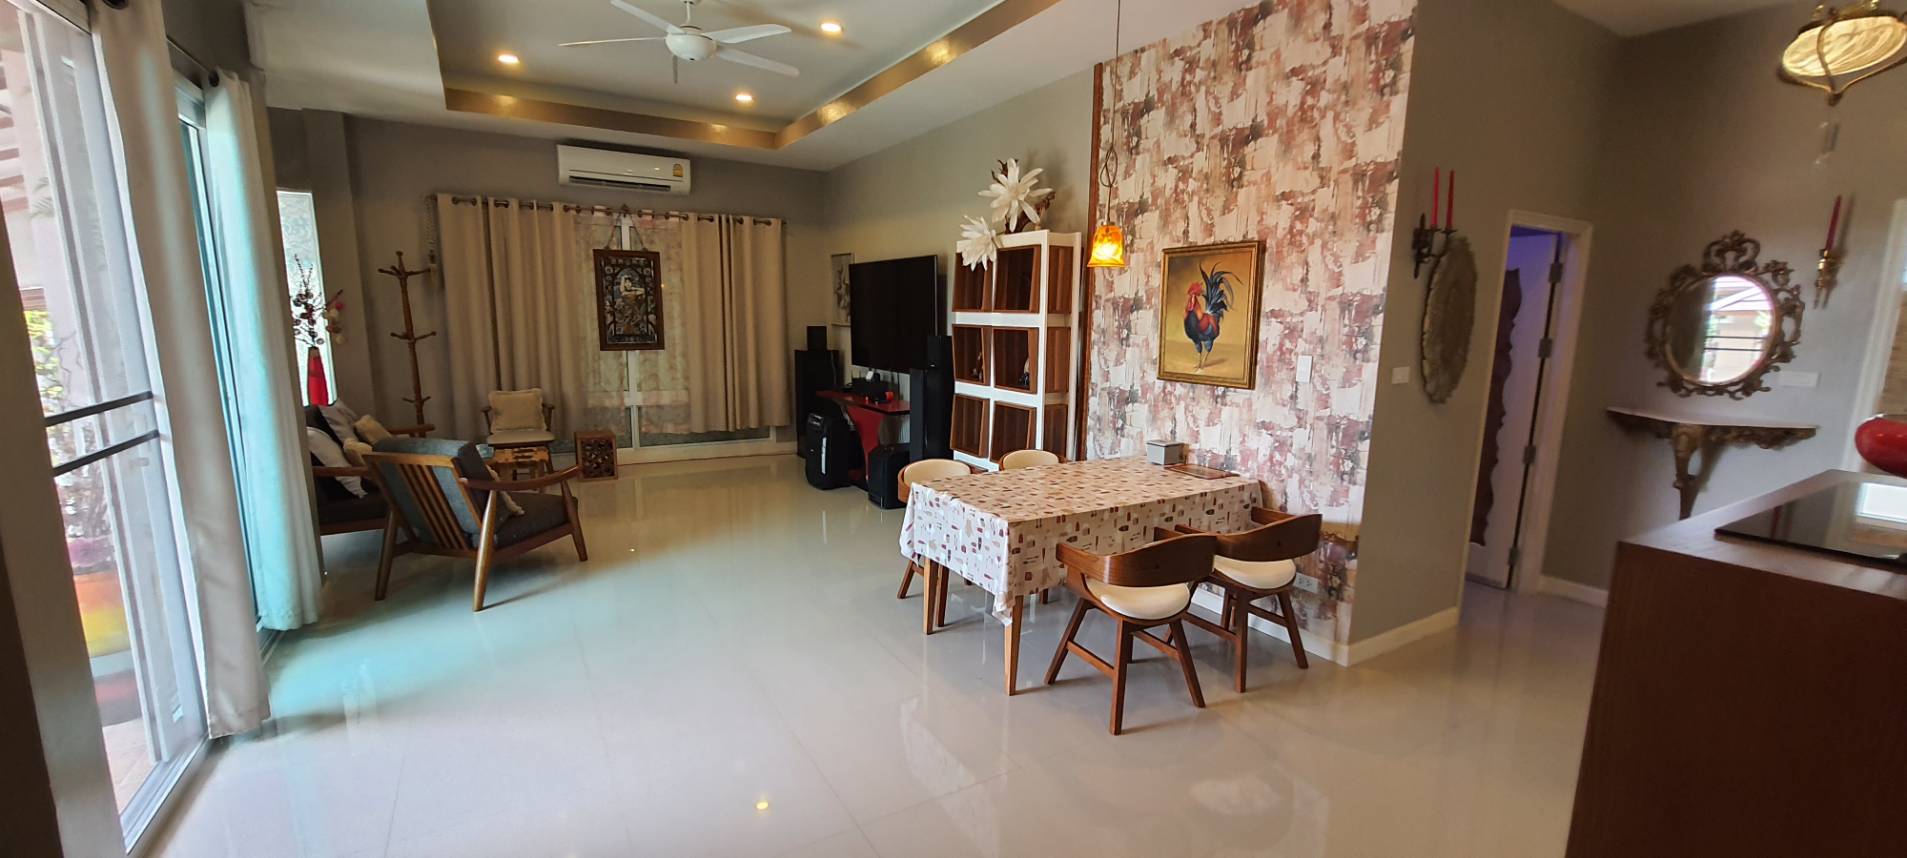 Le Beach Home Village. 4 bedrooms pool house in the Bang Saray